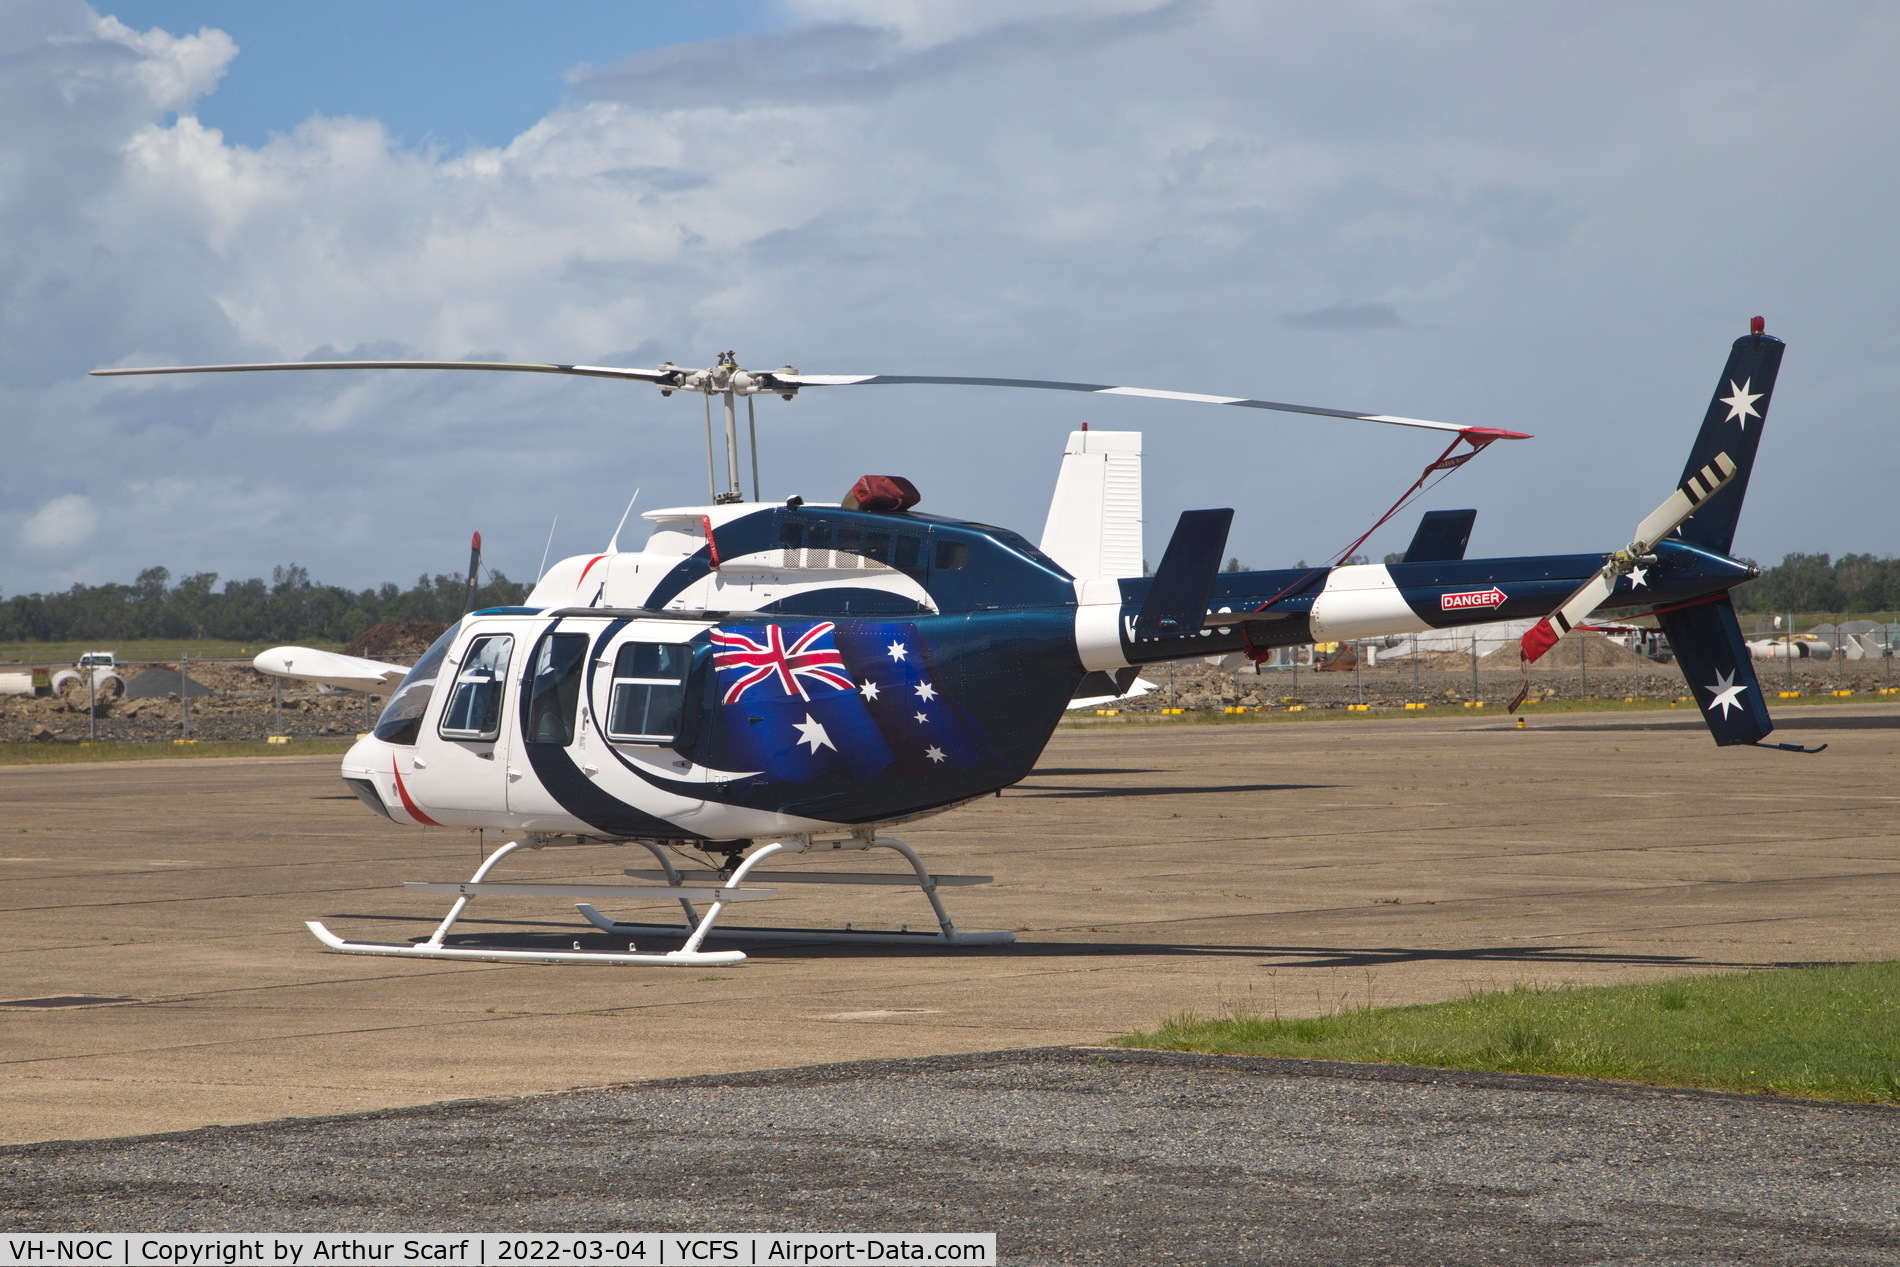 VH-NOC, 1980 Bell 206L-1 LongRanger II C/N 45533, Coffs Harbour Airport March 2022 - in the aftermath of massive flooding in the Northern rivers